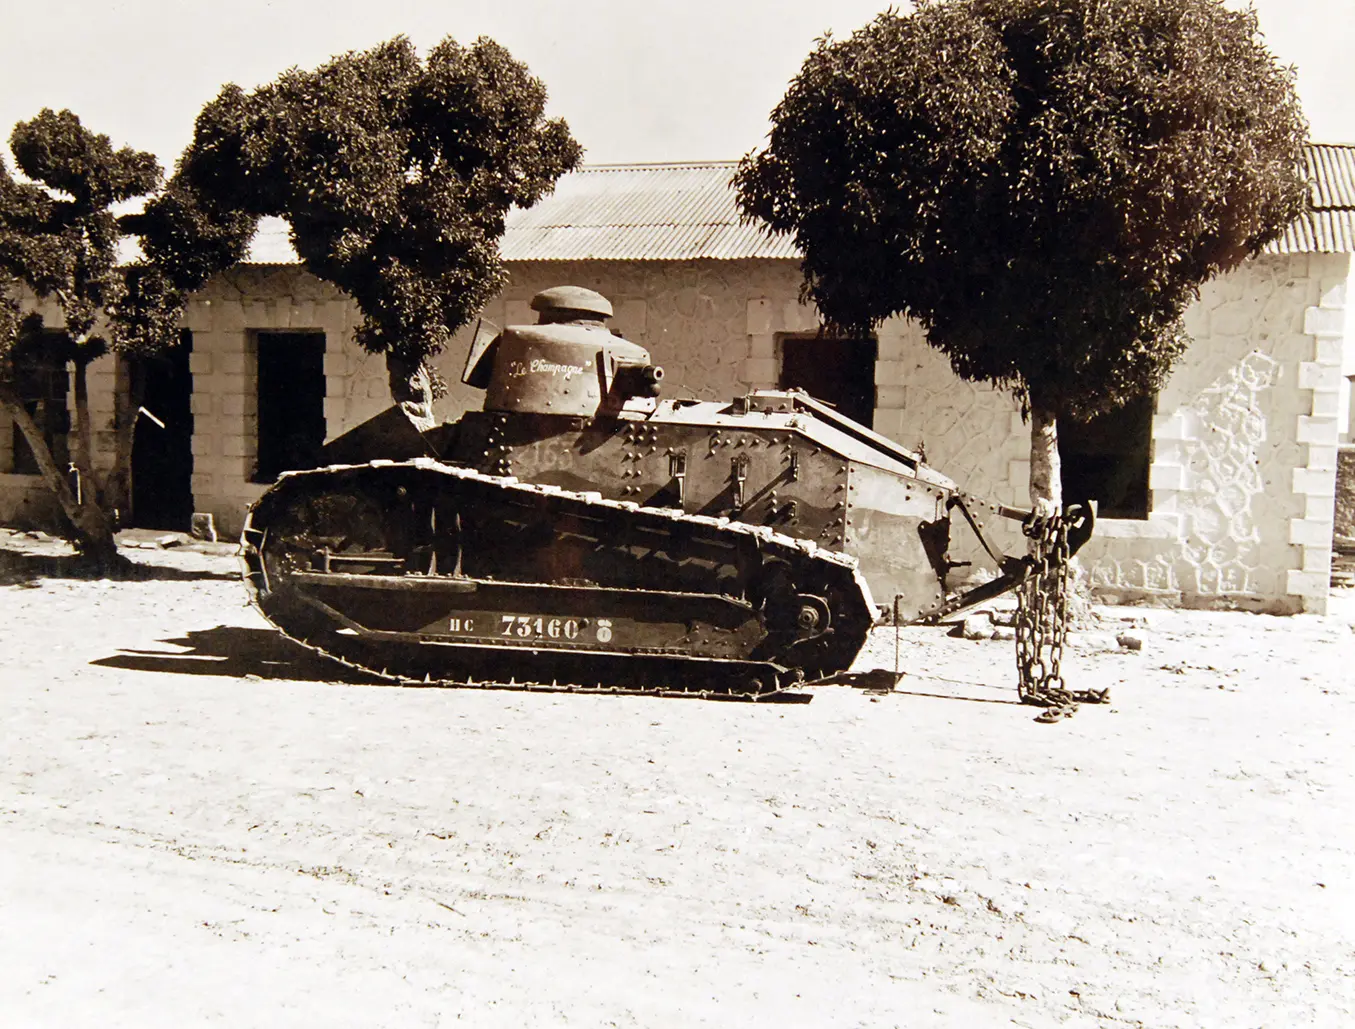 A black and white photograph of a French Renault tank, parked in front of a stone building. The tank has the words Le Champagne artfully written on its turret